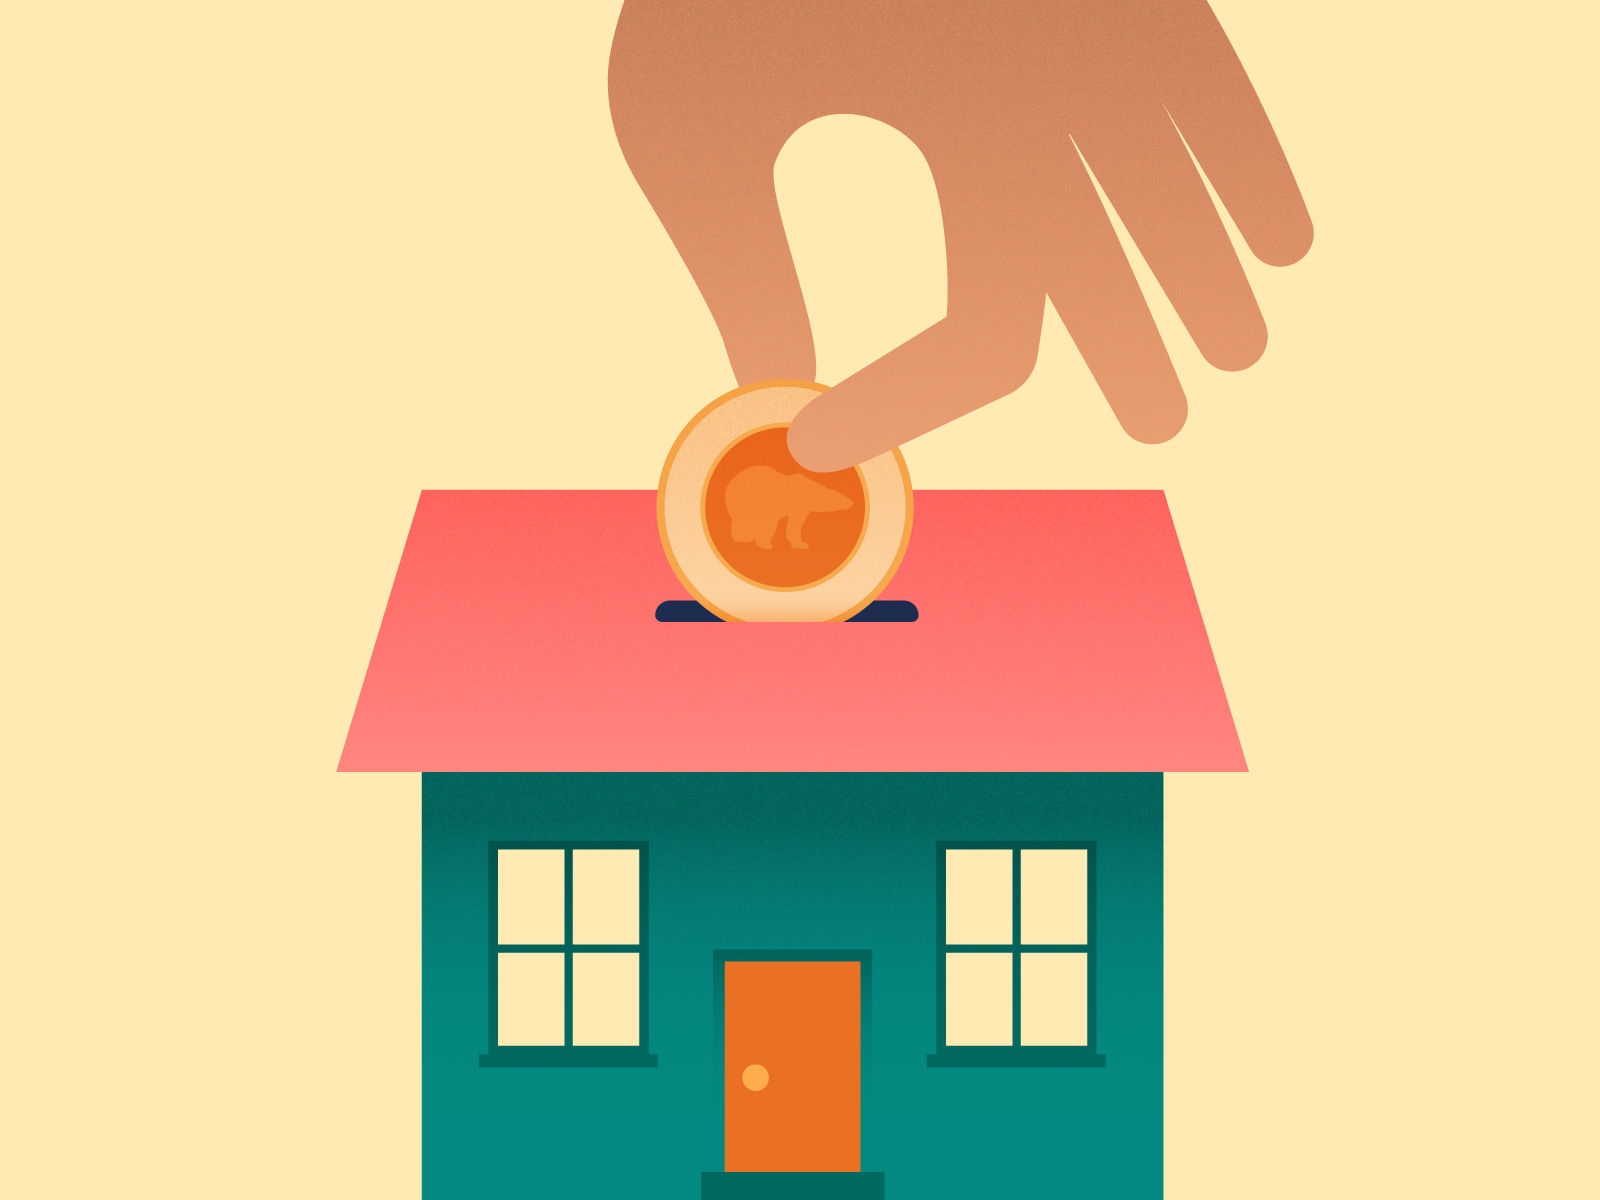 Illustration of a hand inserting a coin into the roof of a house.